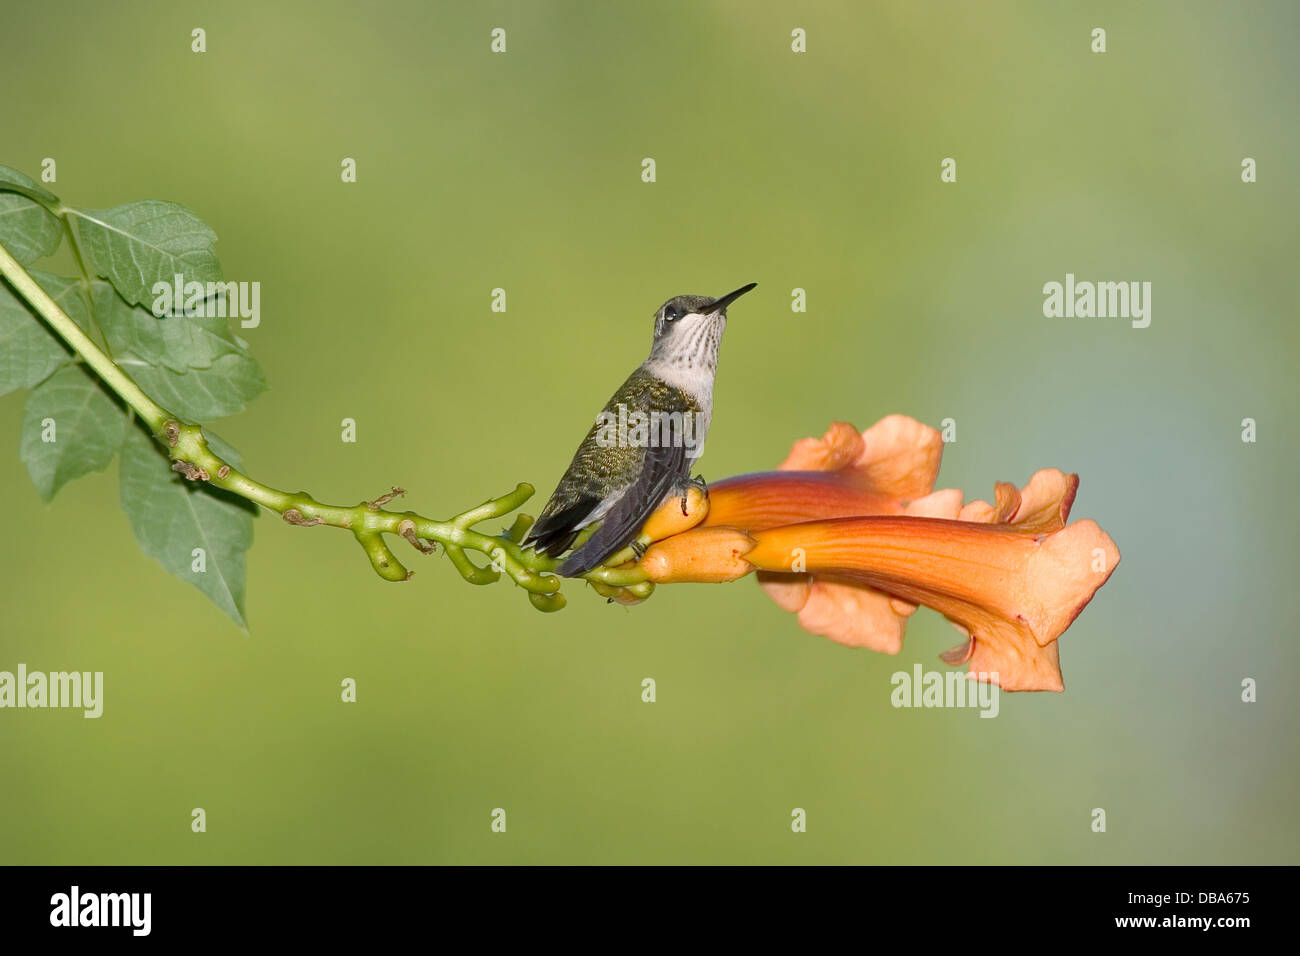 A Tiny Bird, The Ruby-Throated Hummingbird Female On An Orange Trumpet Lily With Green Background, Archilochus colubris Stock Photo